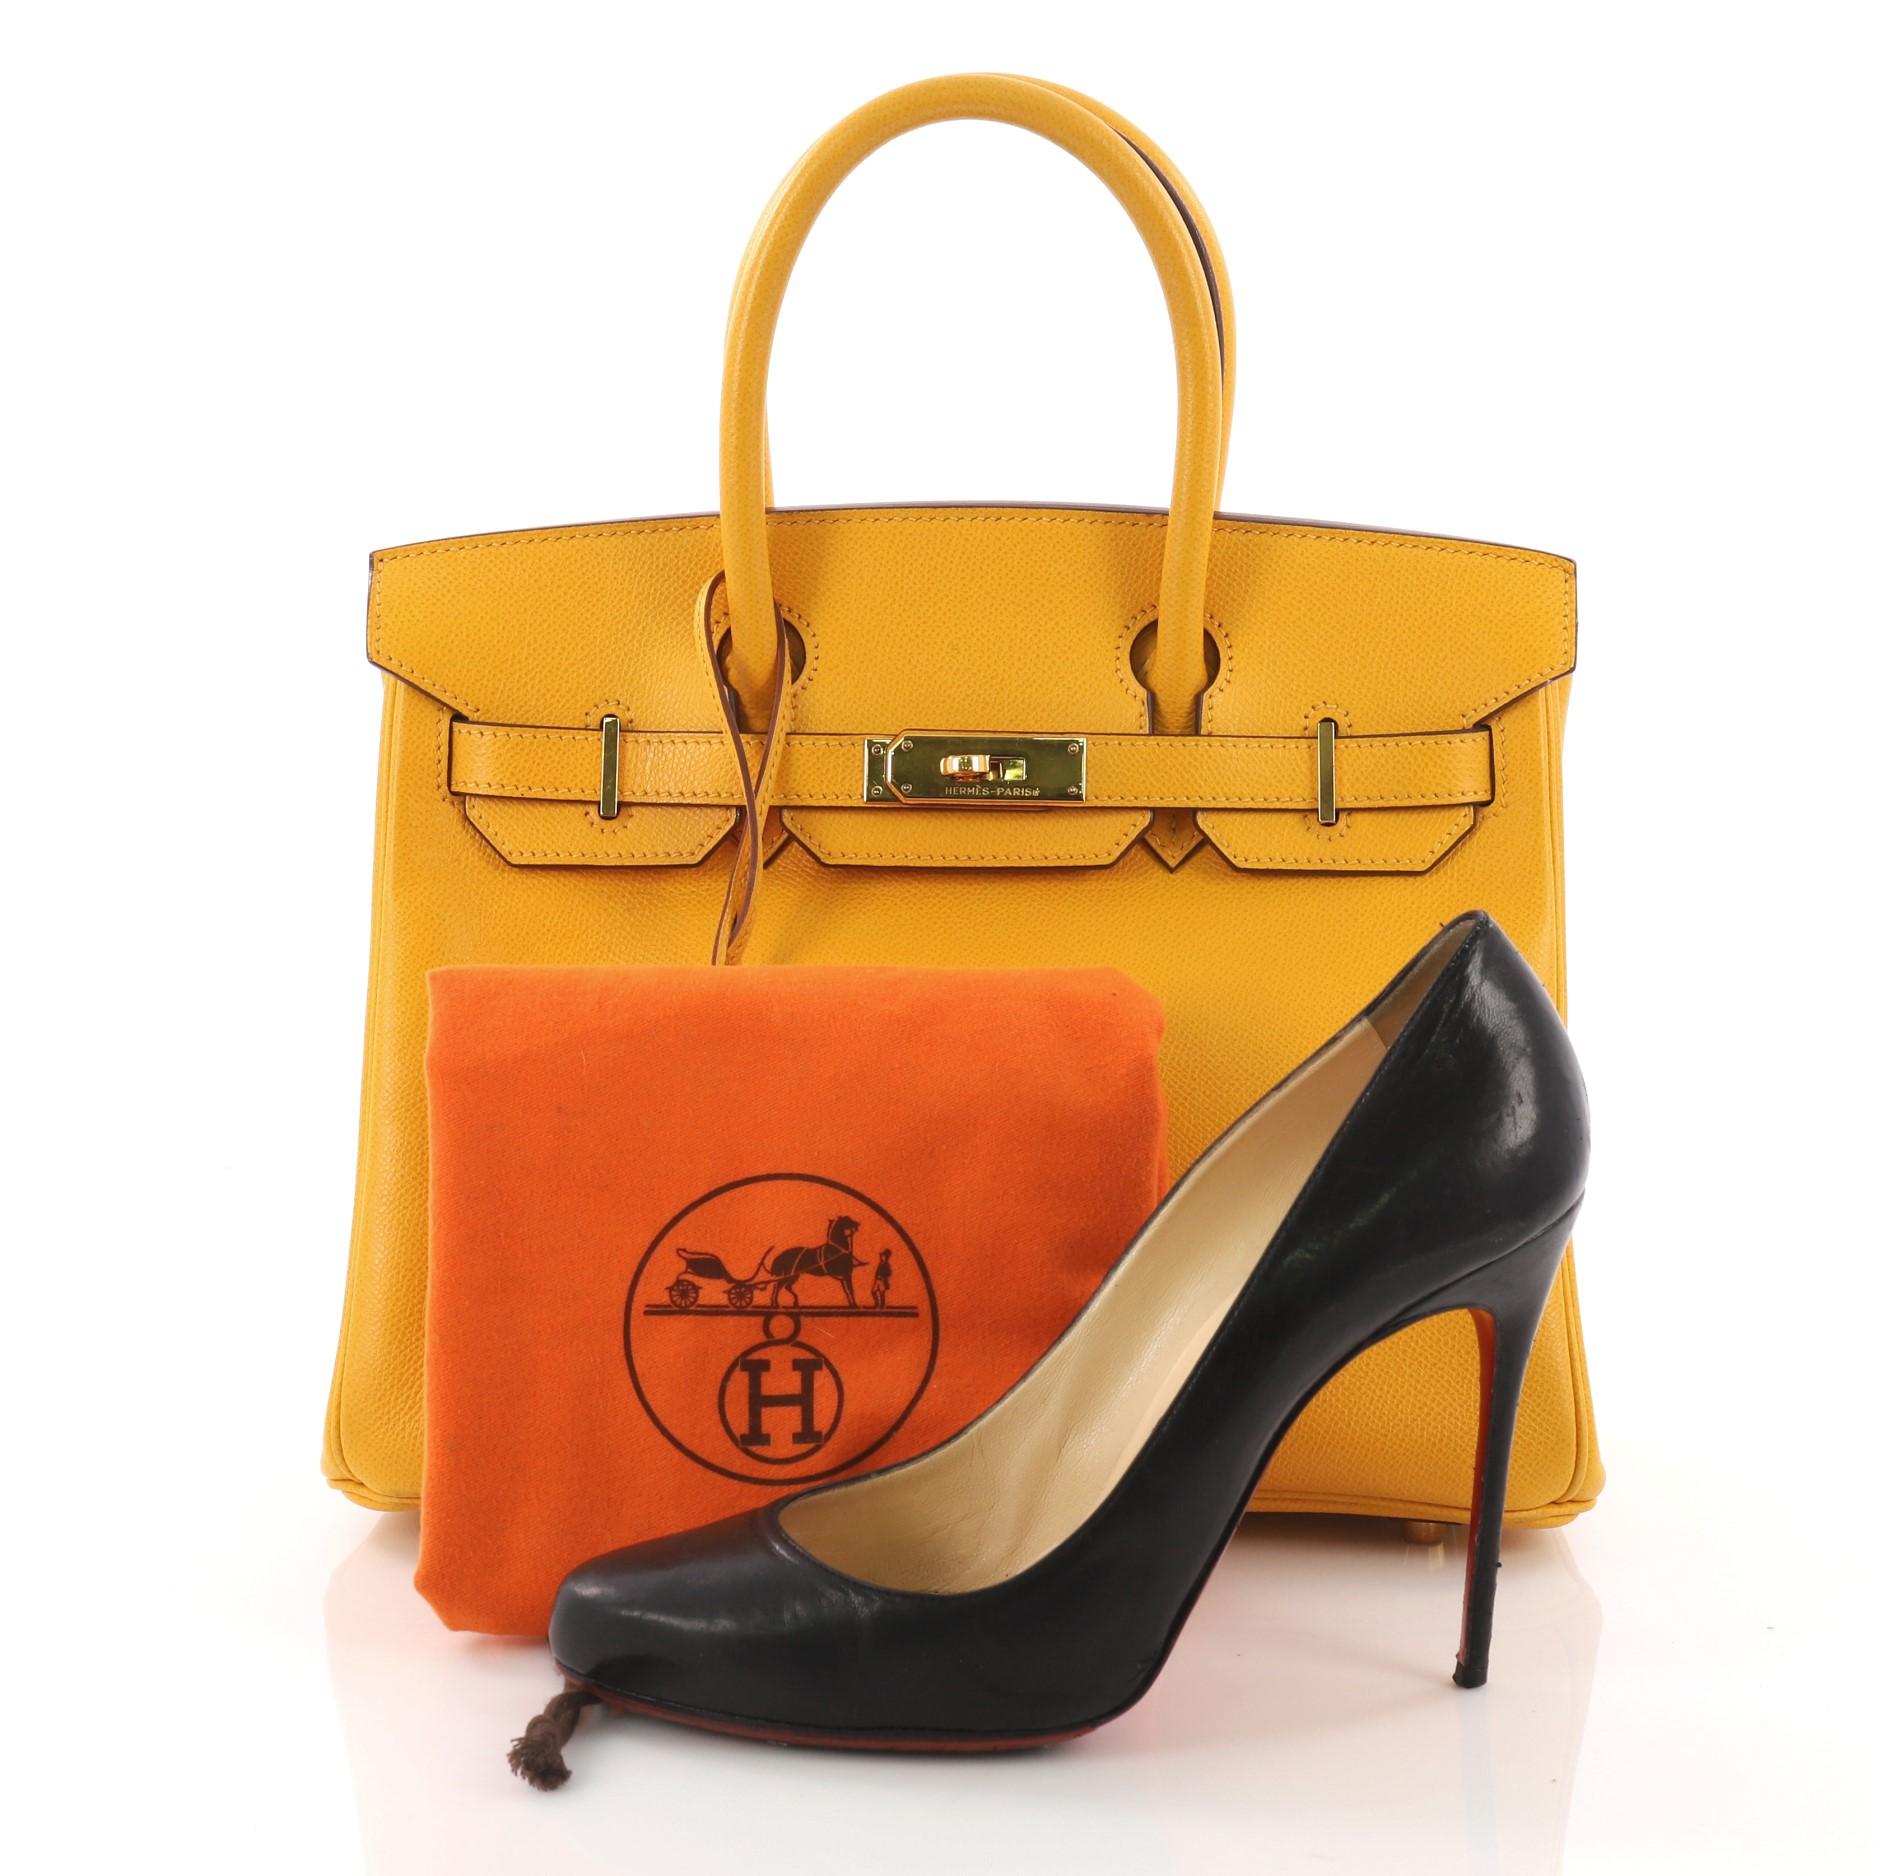 This Hermes Birkin Handbag Jaune Courchevel with Gold Hardware 30, crafted in Jaune yellow courchevel leather, features dual rolled handles, front flap and gold-tone hardware. Its turn-lock closure opens to a yellow leather interior with slip and